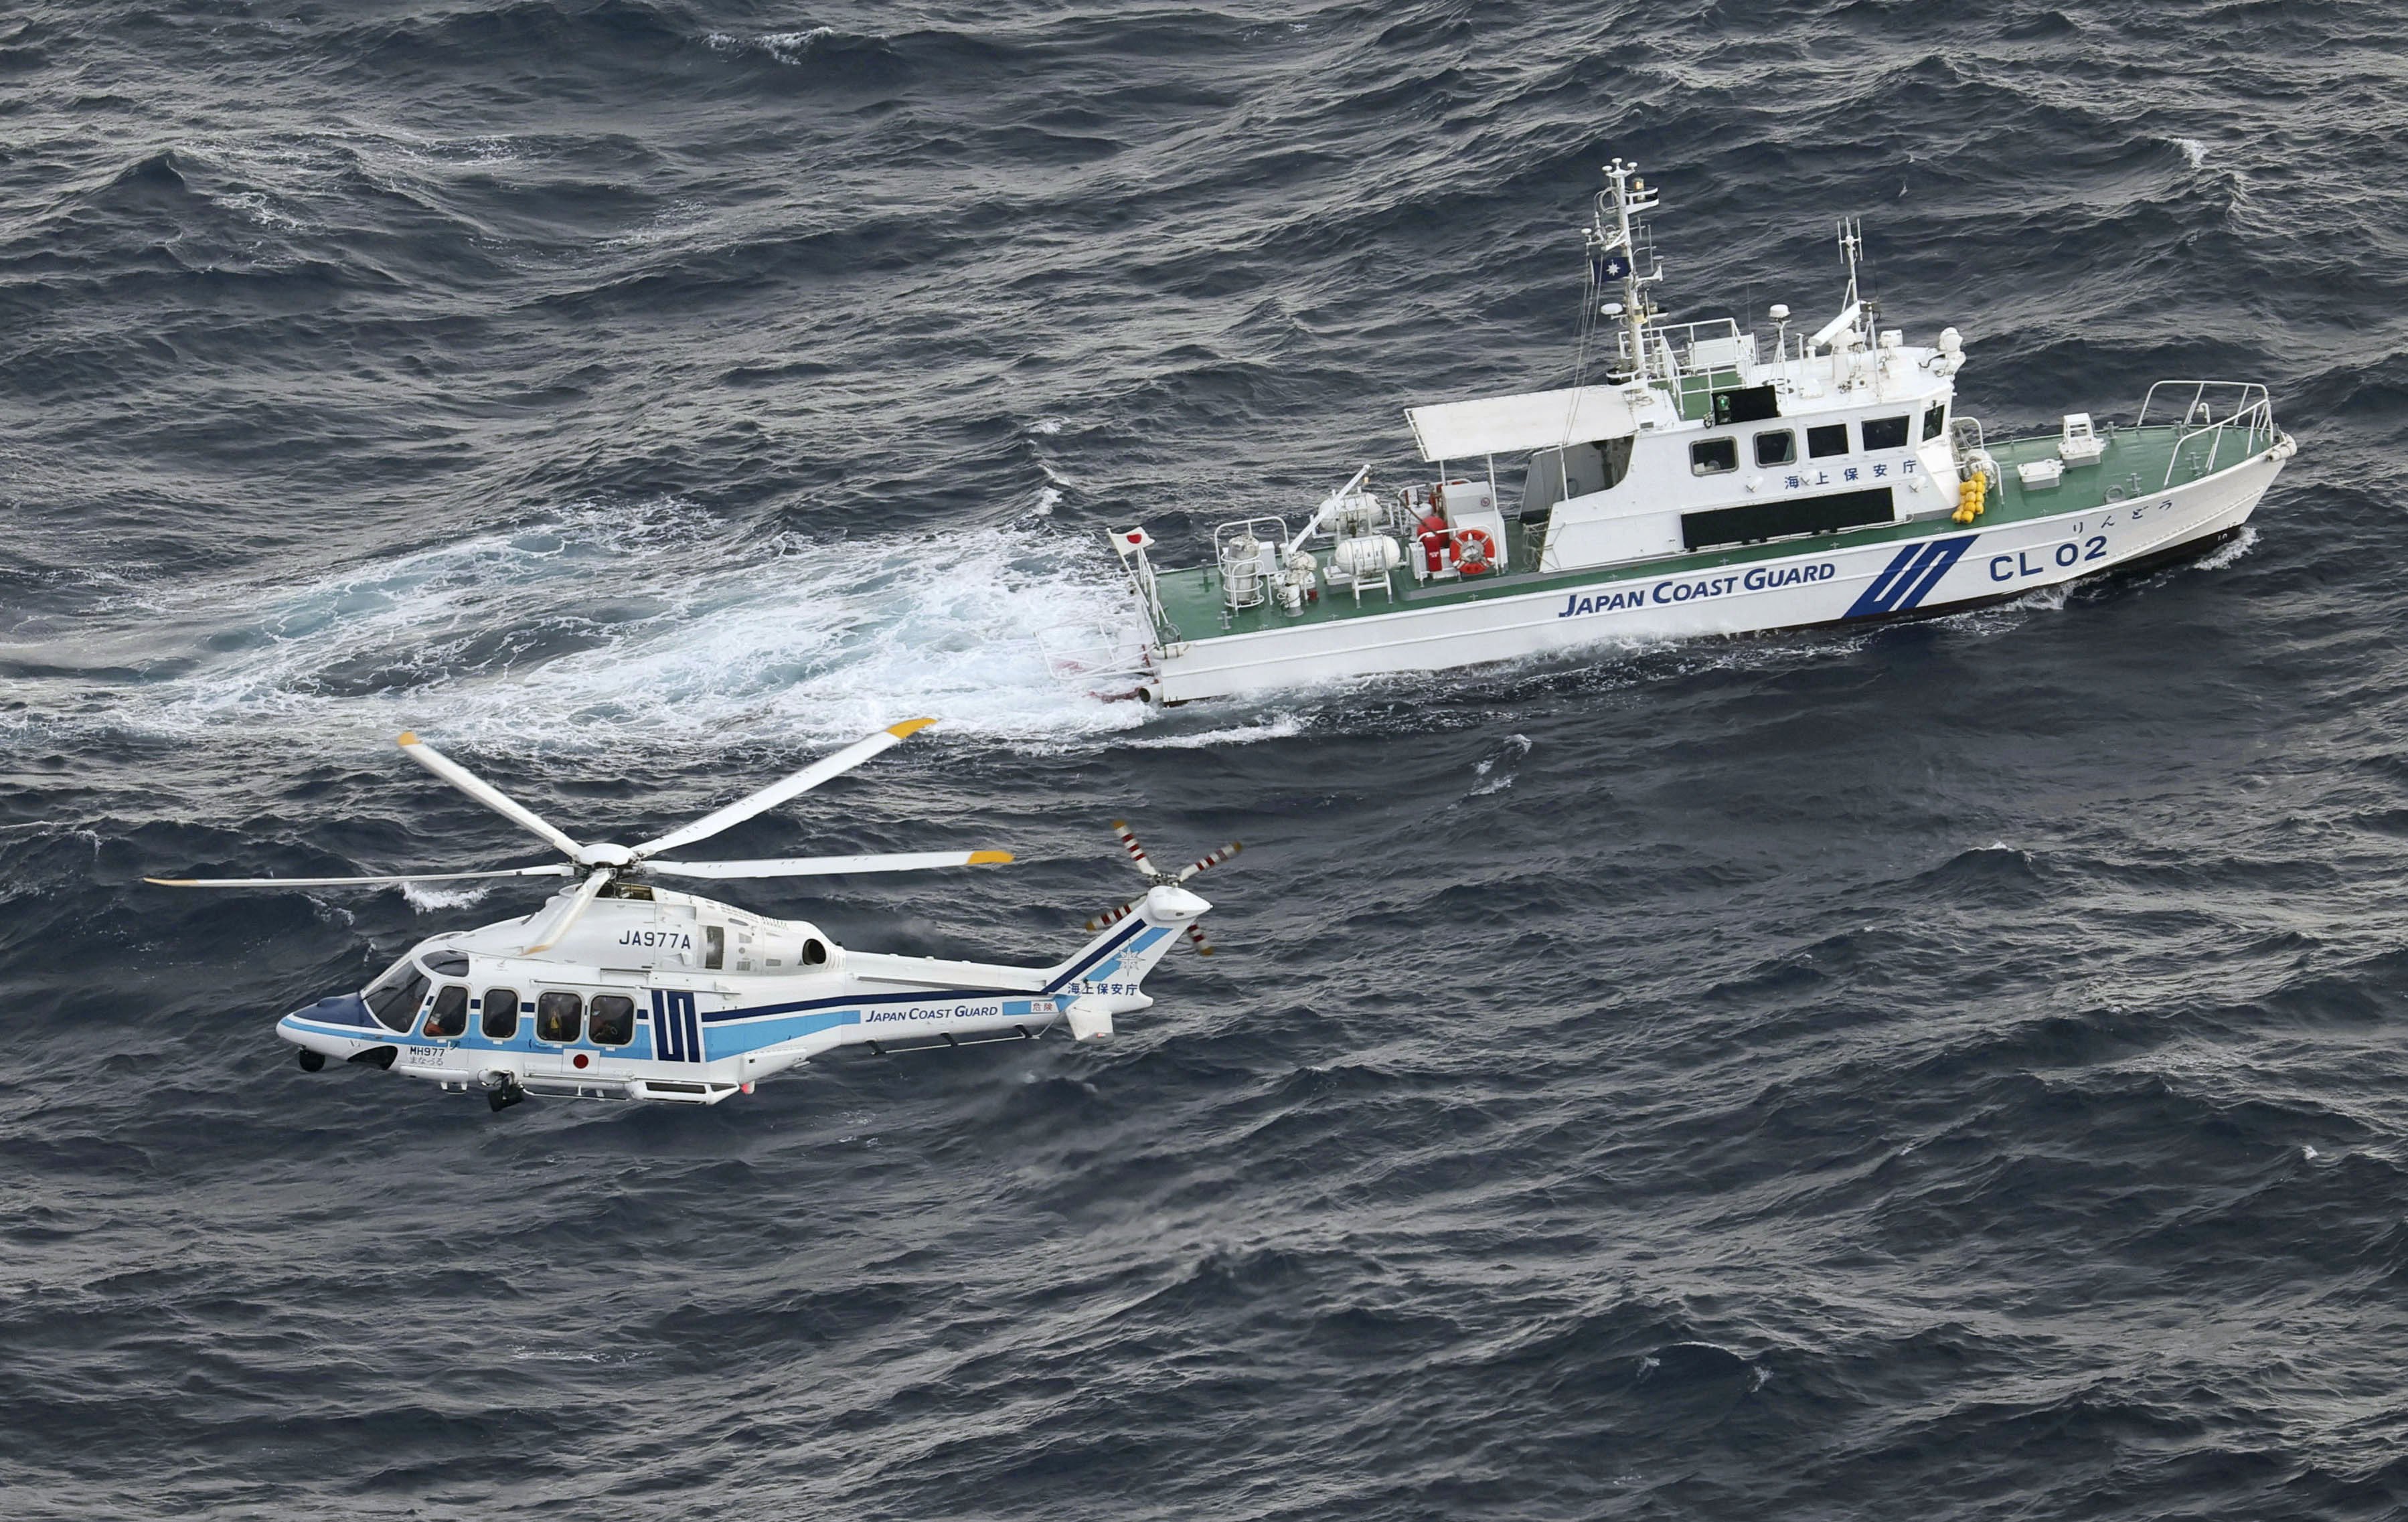 A Japan Coast Guard patrol ship and helicopter take part in a search and rescue mission in November. Photo: Kyodo